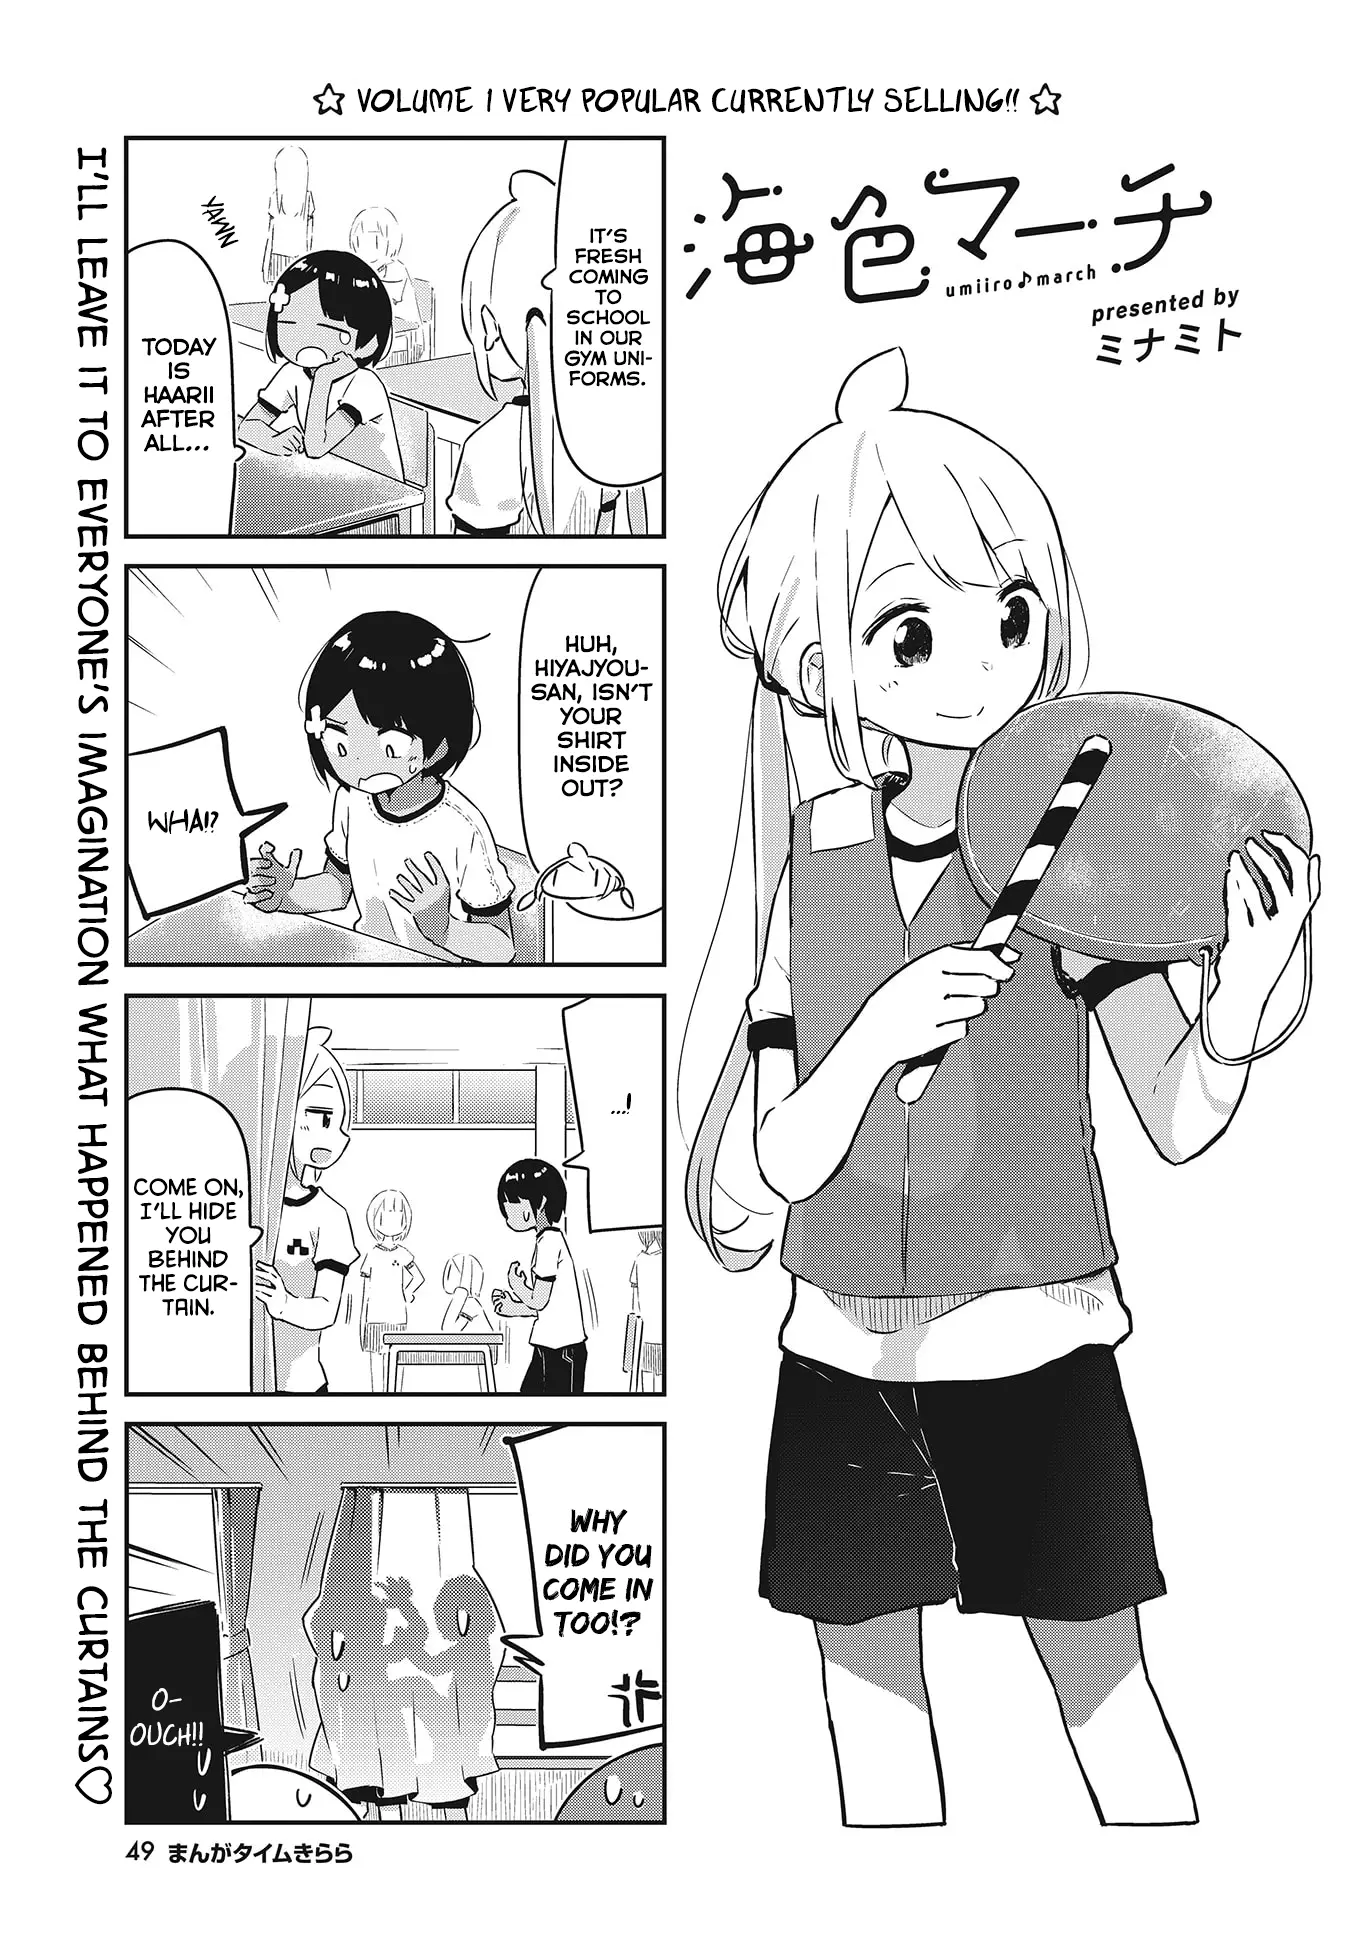 Umiiro March - 18 page 2